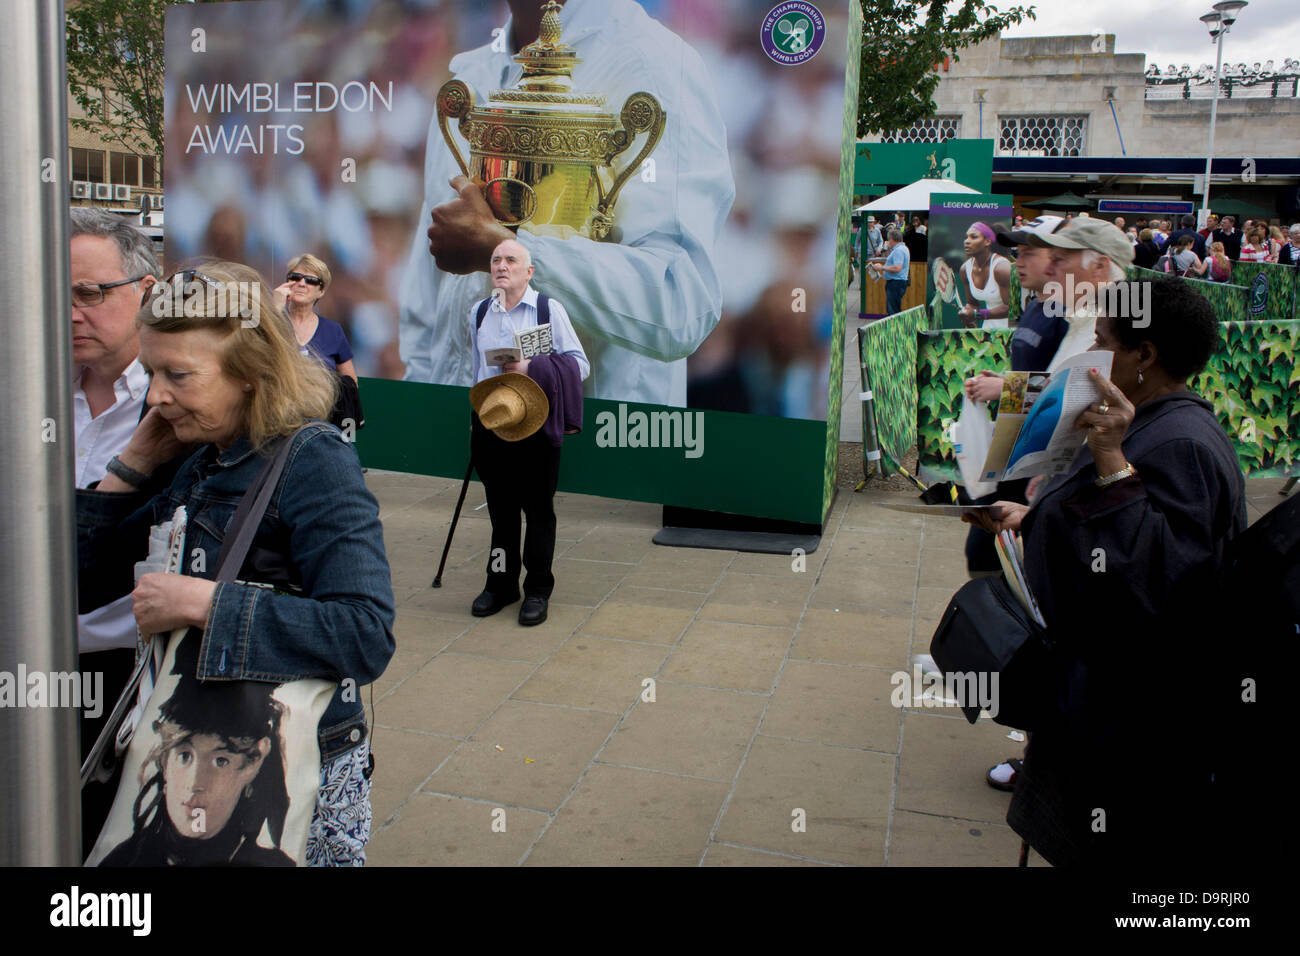 Wimbledon, England, 25th June 2013 - Day 2 of the annual lawn tennis championships and spectators mingle with locals near a large champions trophy billboard, outside the mainline and underground (subway) station in the south London suburb. The Wimbledon Championships, the oldest tennis tournament in the world, have been held at the nearby All England Club since 1877. Stock Photo